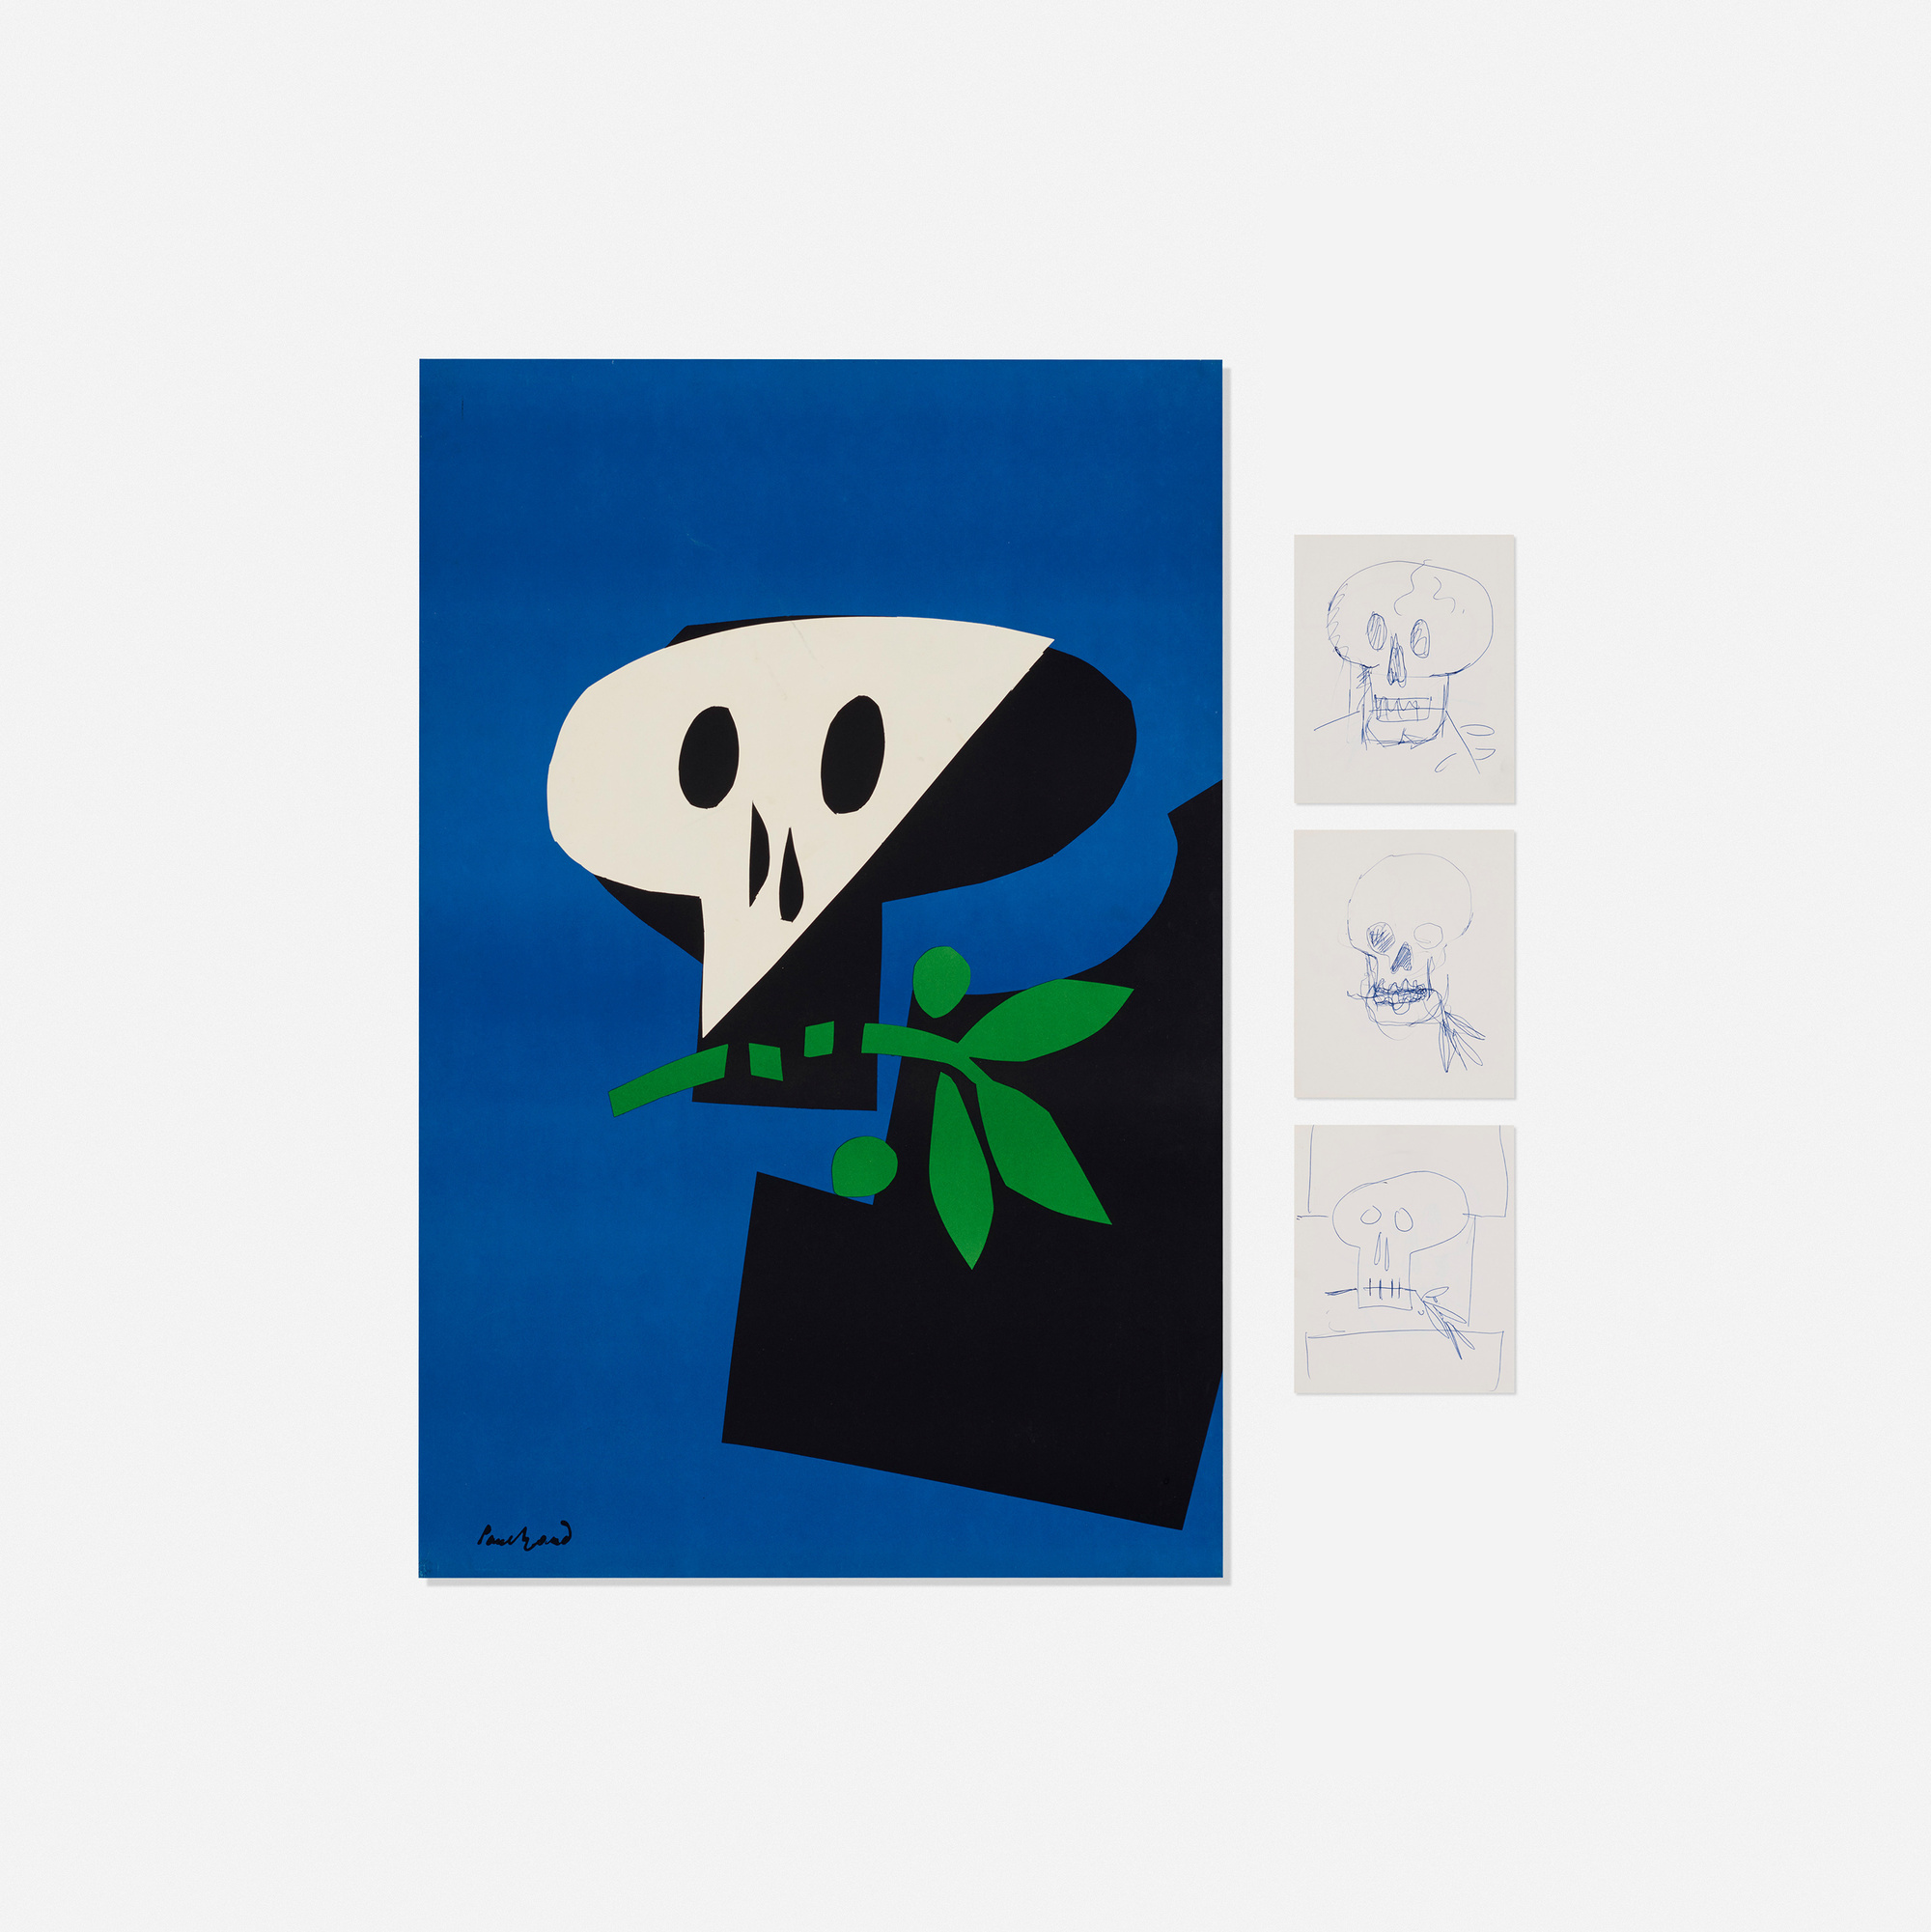 332: PAUL RAND, Death Mask poster and drawings2000 x 2001